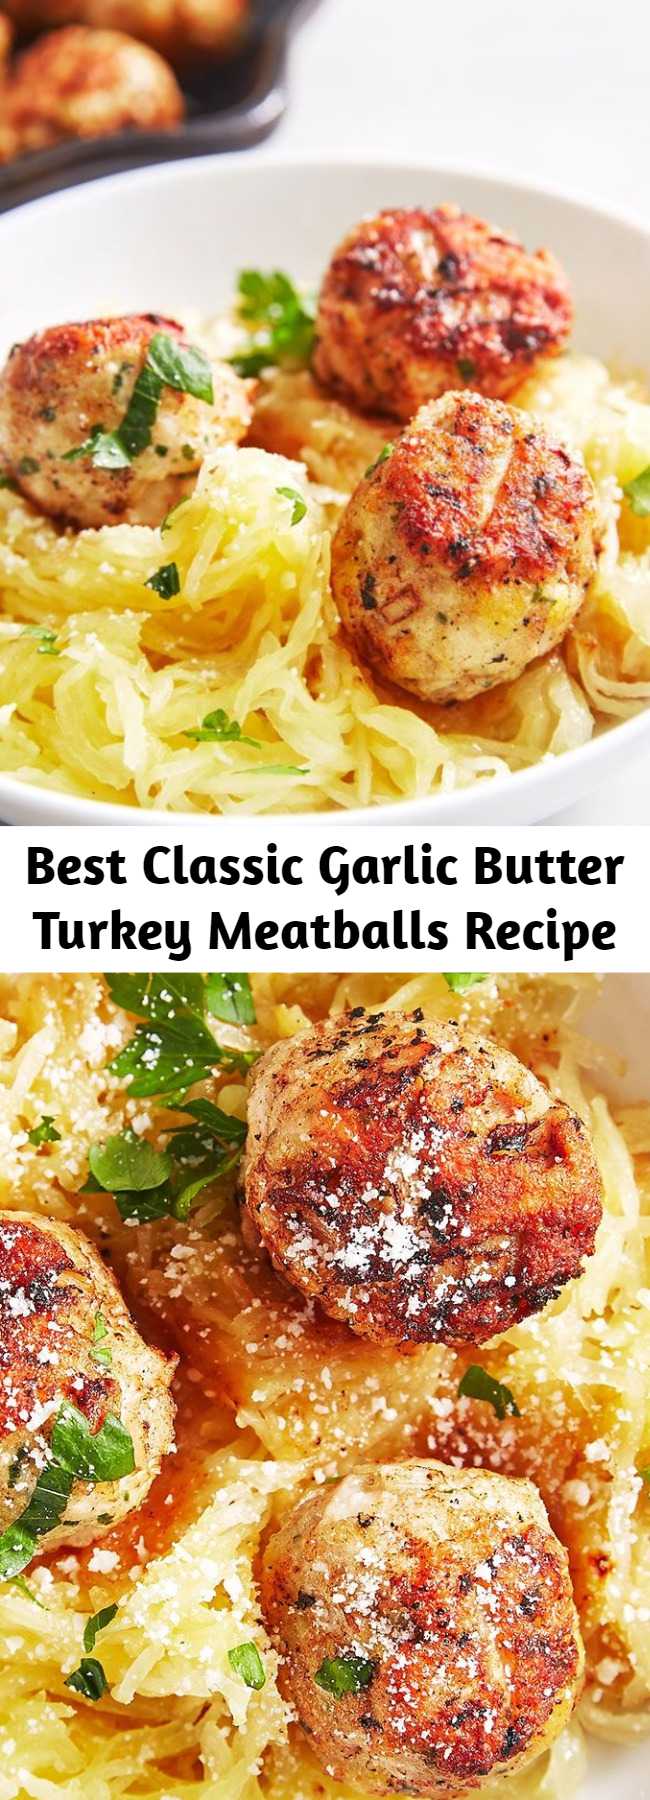 Best Classic Garlic Butter Turkey Meatballs Recipe - Insanely delicious! Garlicky, tender, and NOT boring.